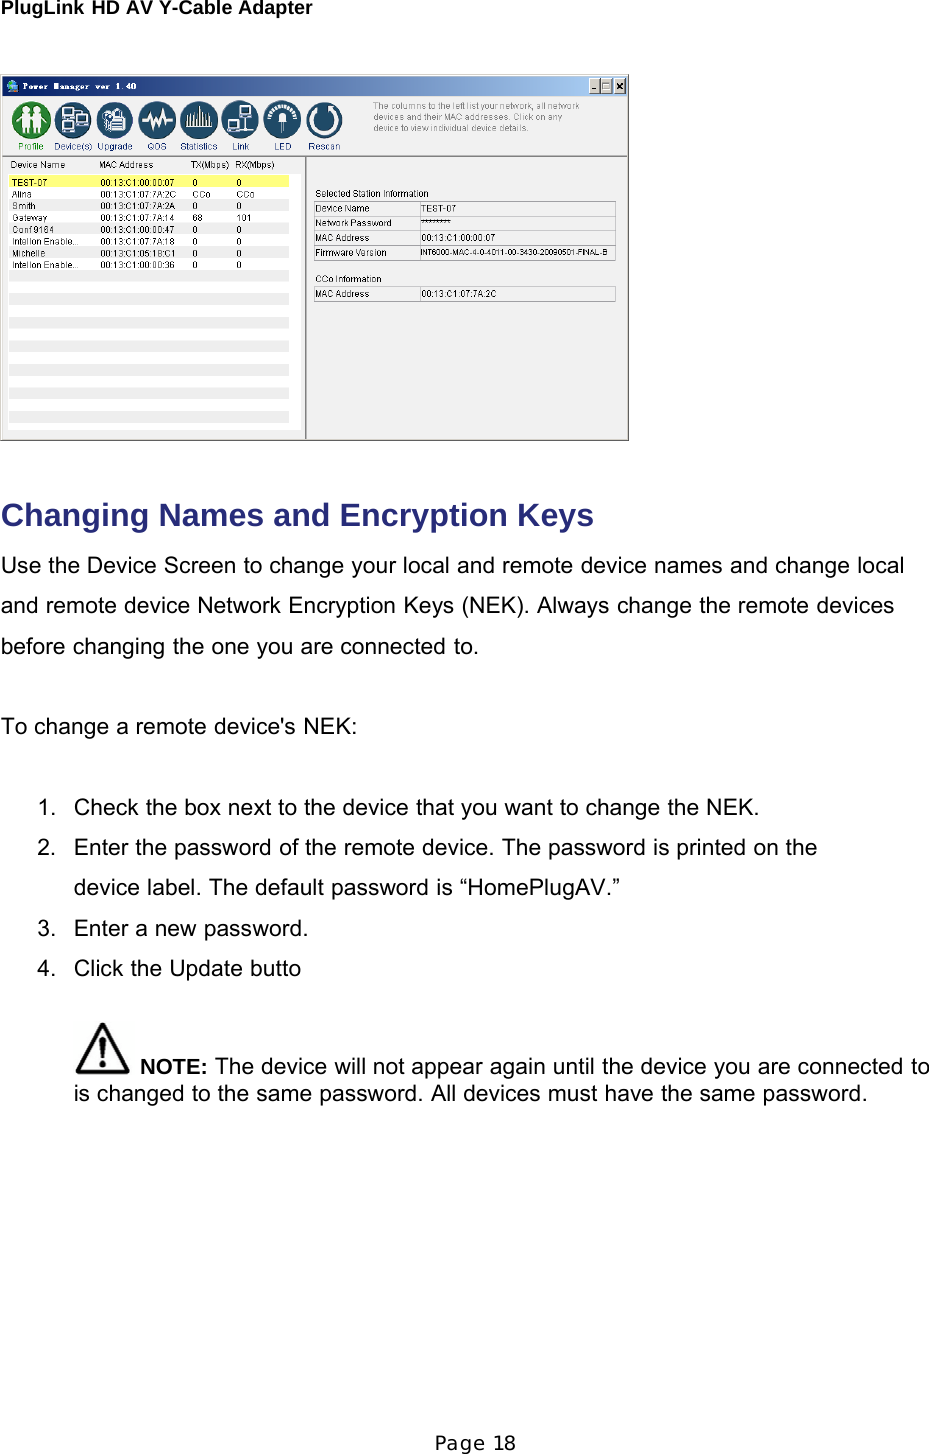 PlugLink HD AV Y-Cable Adapter Page 18          Changing Names and Encryption Keys  Use the Device Screen to change your local and remote device names and change local and remote device Network Encryption Keys (NEK). Always change the remote devices before changing the one you are connected to.   To change a remote device&apos;s NEK:    1.   Check the box next to the device that you want to change the NEK.  2.   Enter the password of the remote device. The password is printed on the device label. The default password is “HomePlugAV.” 3.   Enter a new password.  4.   Click the Update butto    NOTE: The device will not appear again until the device you are connected to is changed to the same password. All devices must have the same password. 